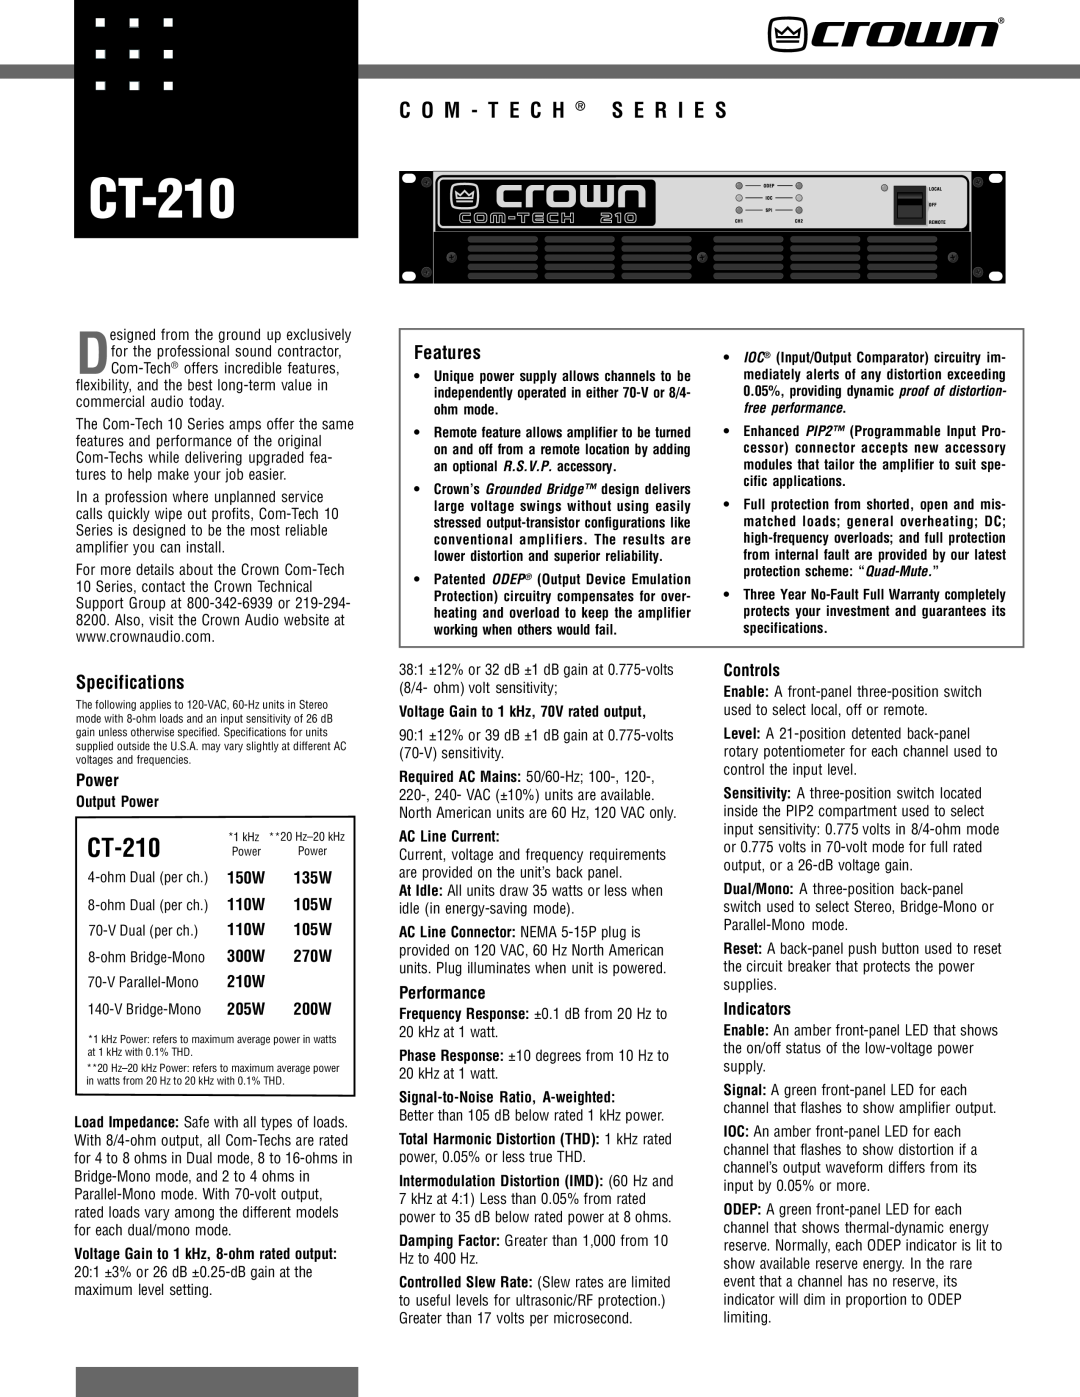 Crown Audio CT-210 specifications Features, Specifications, Power, Performance, Controls, Indicators, free performance 